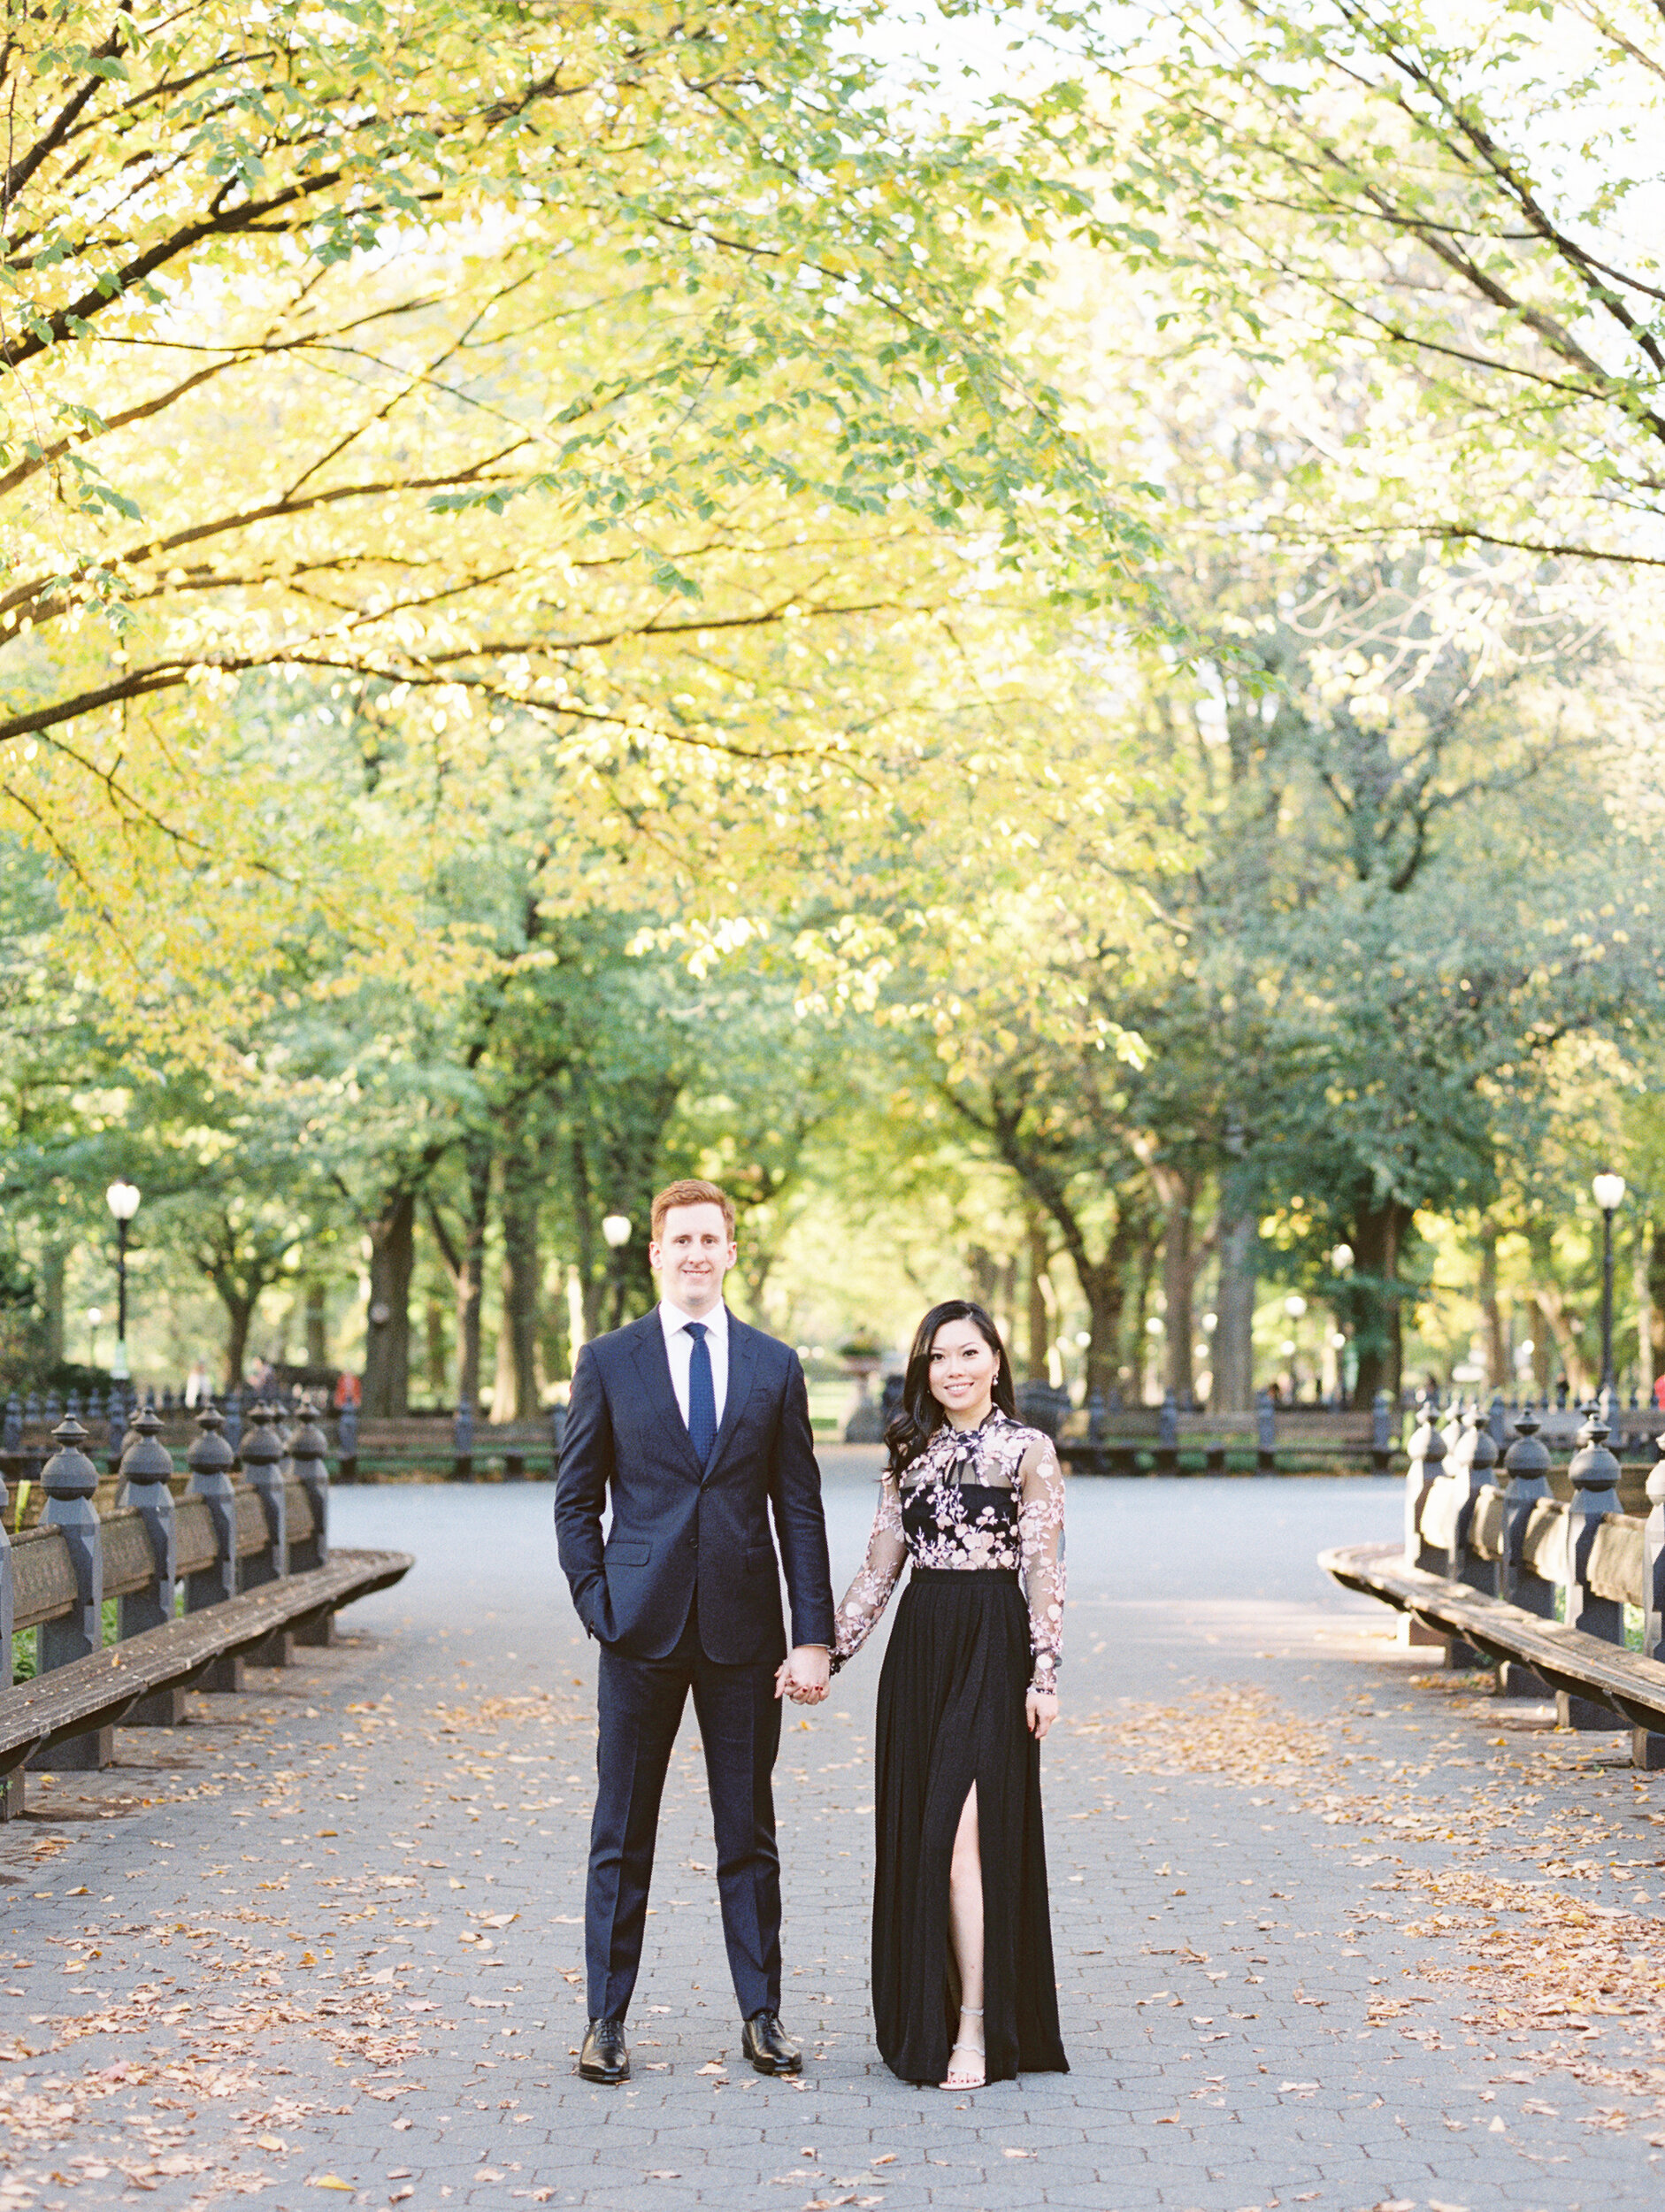 Fall Engagement Session Photos in NYC